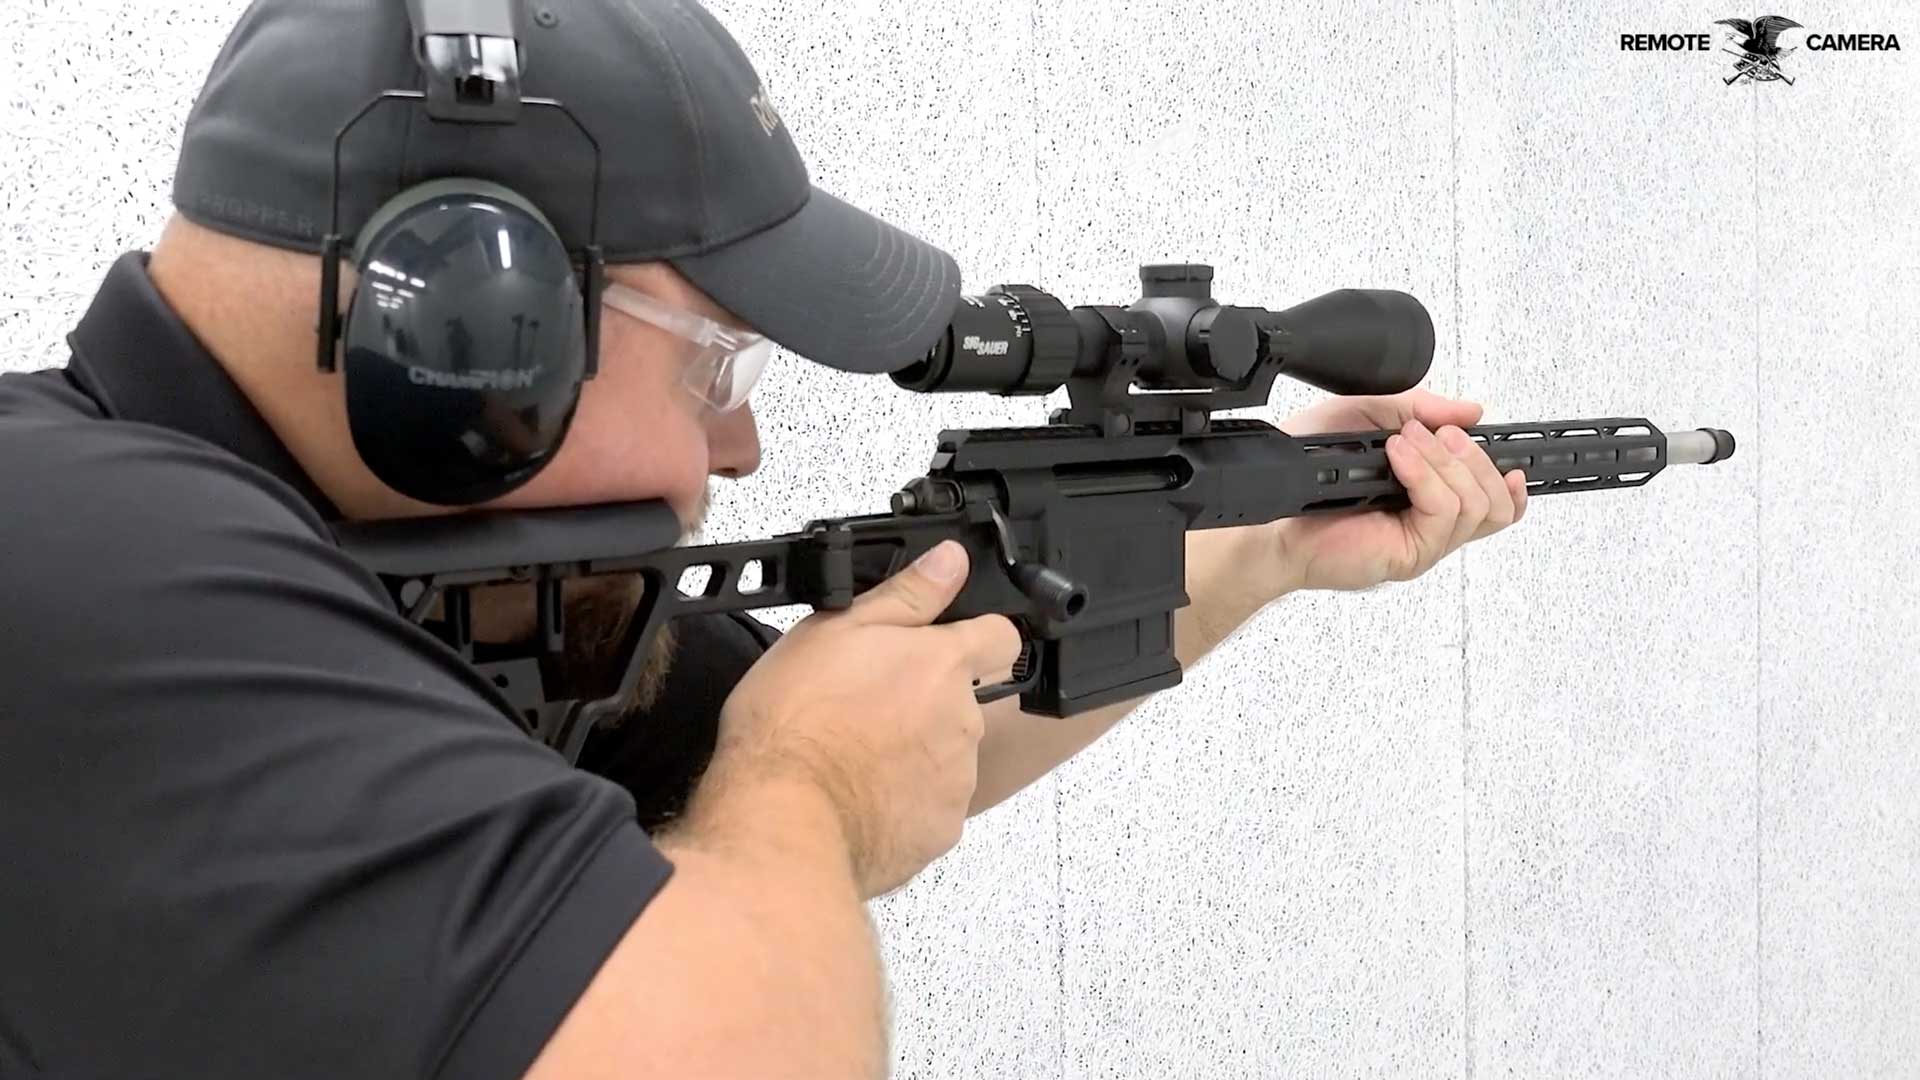 man wearing black shirt ballcap and earmuff shooting black bolt-action rifle from SIG Sauer with text on image noting "REMOTE CAMERA"